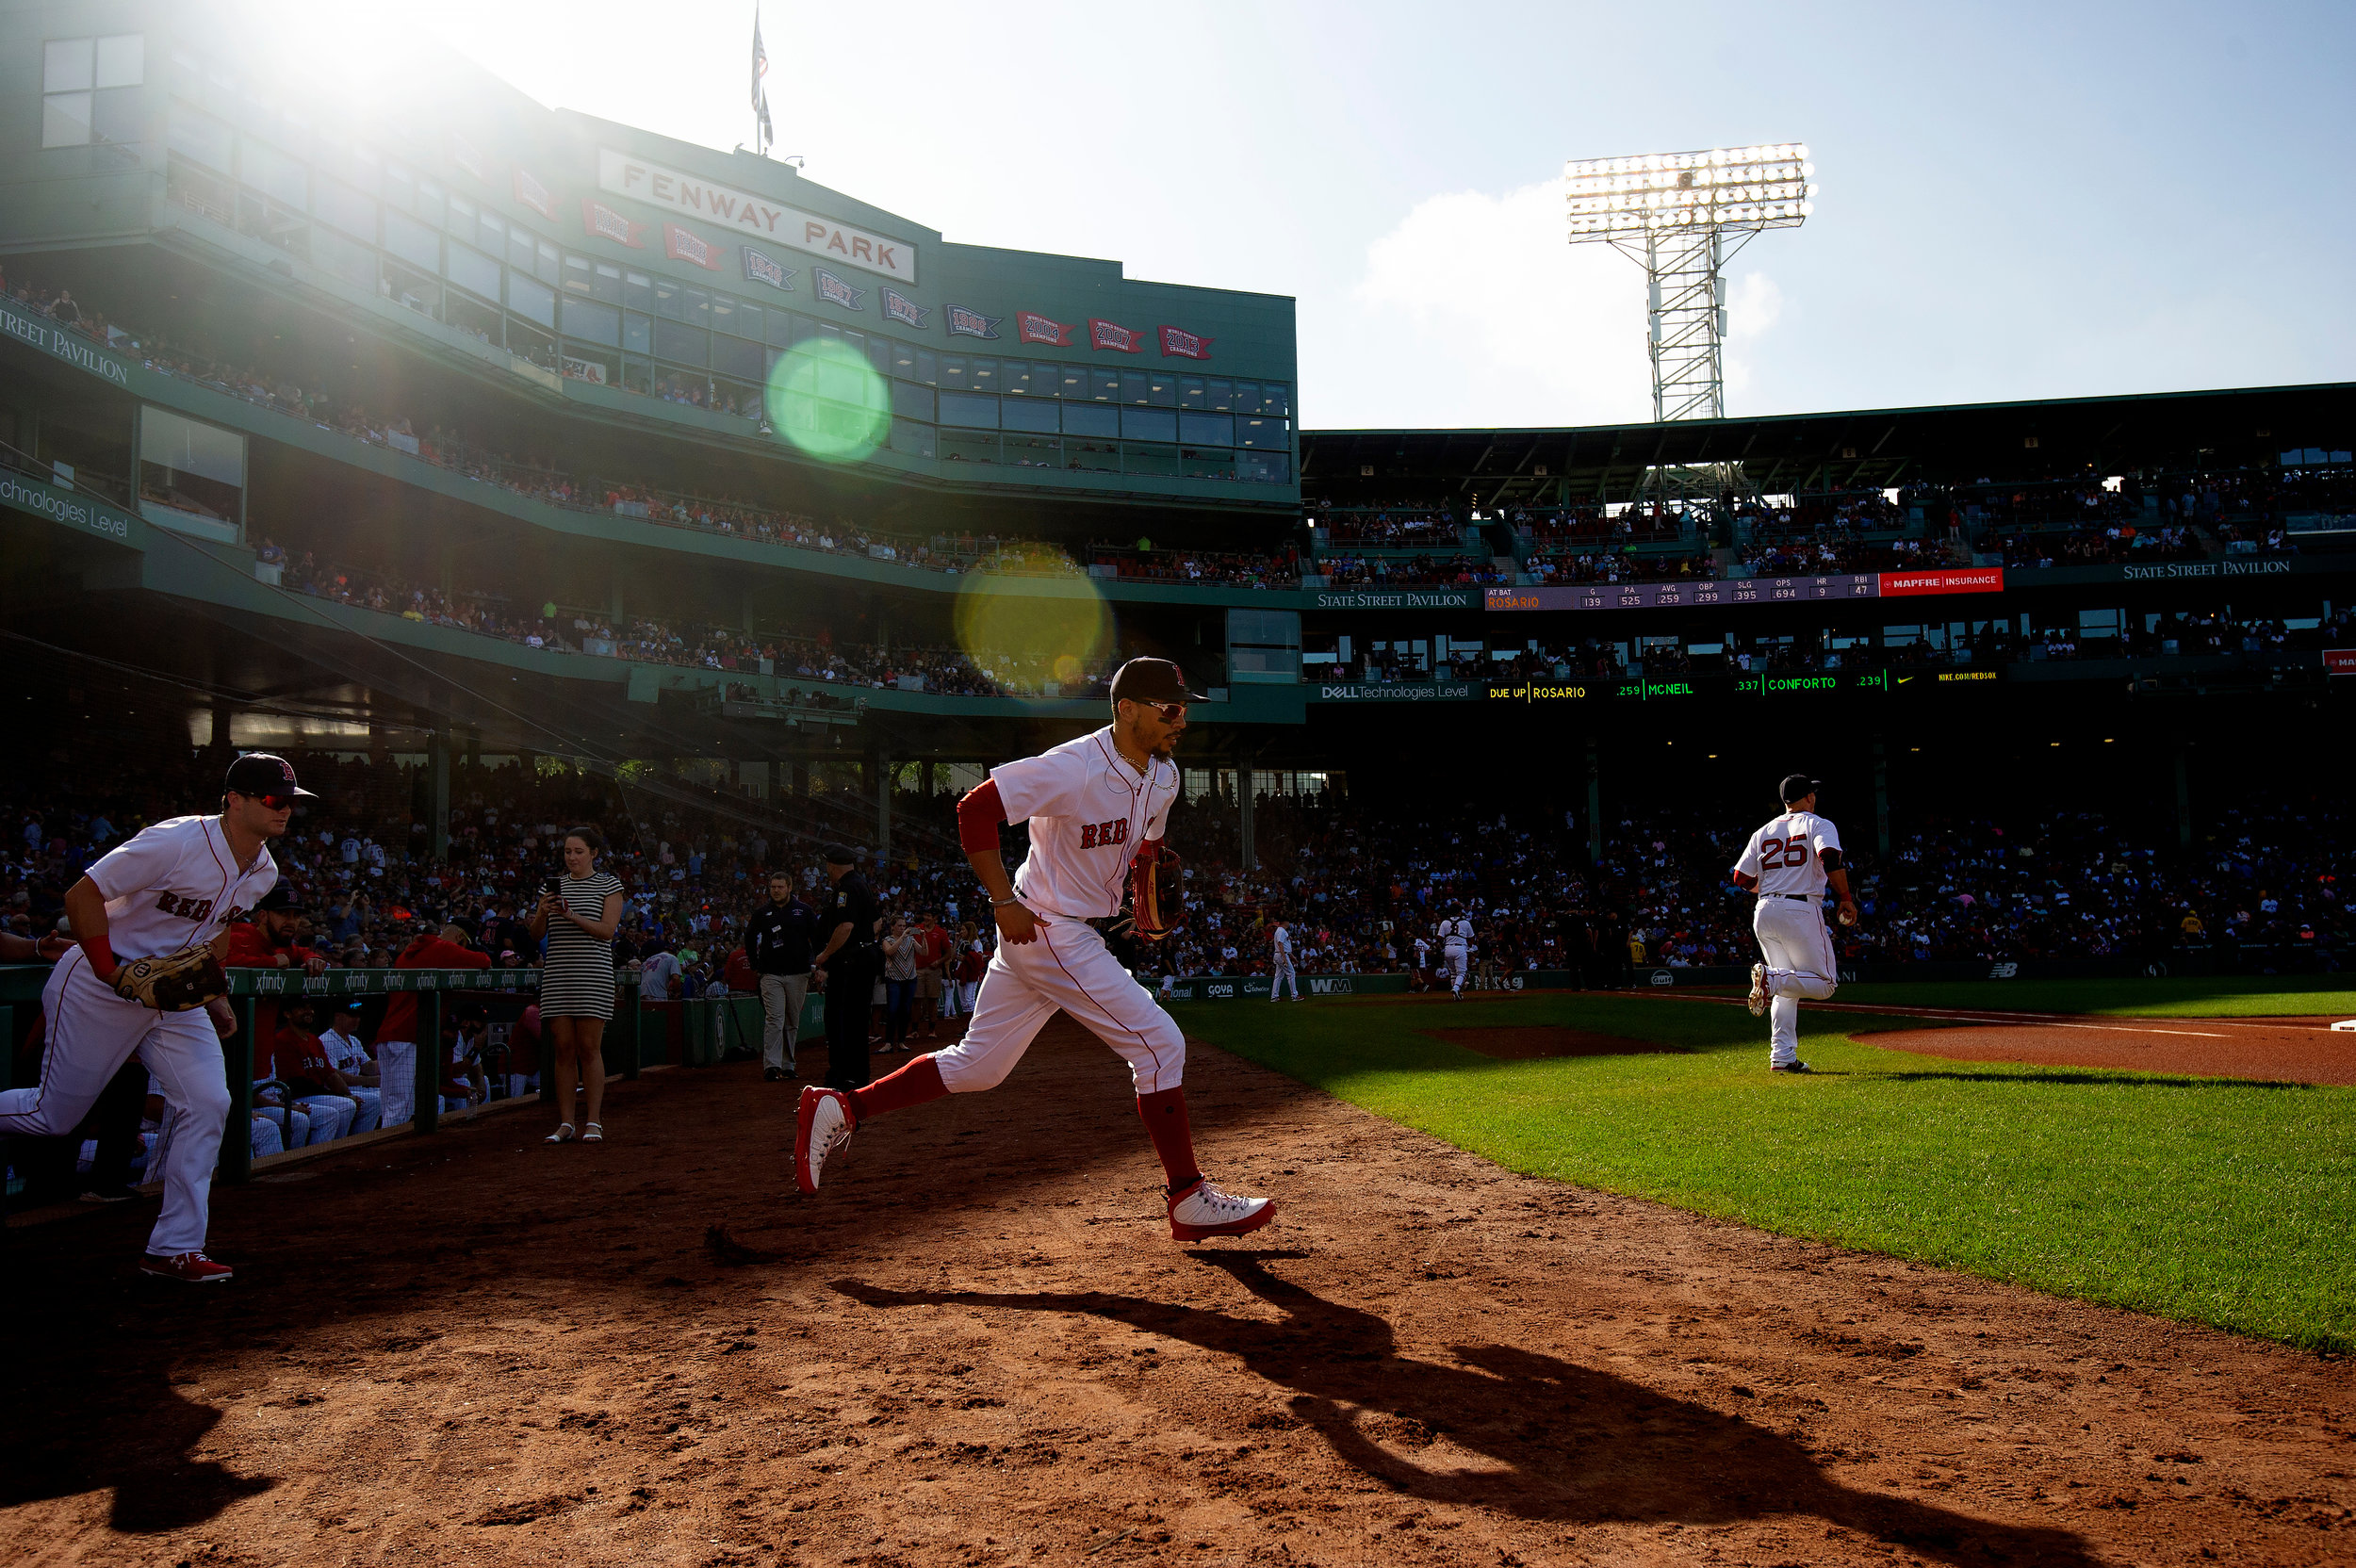  Boston Red Sox outfielder Mookie Betts runs onto the field at the start of the game against the New York Mets at Fenway Park in Boston, Massachusetts, on Saturday, September 15, 2018. 